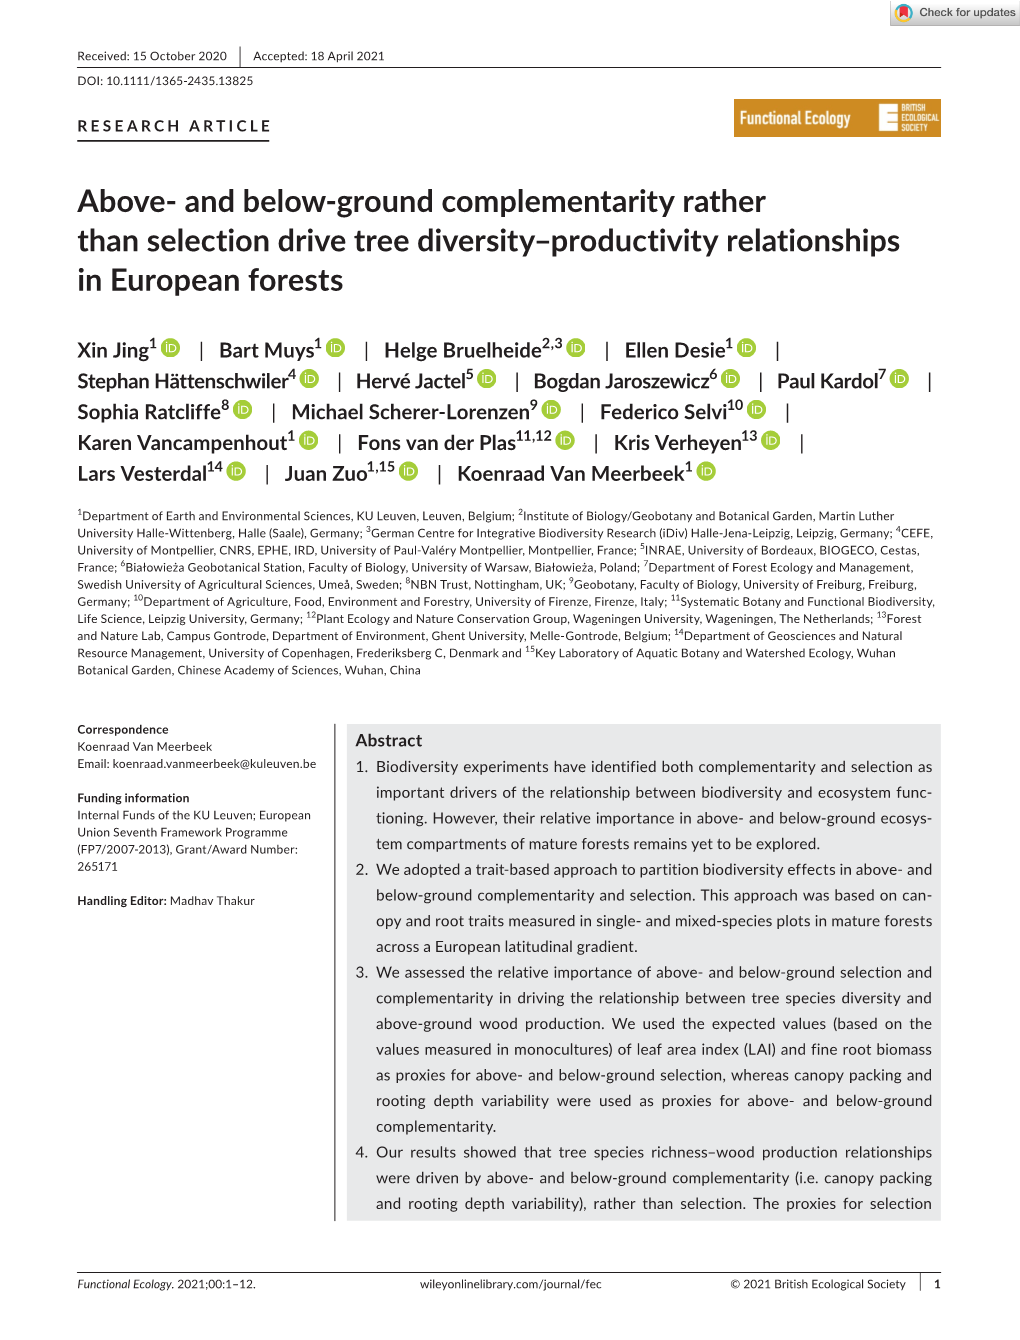 Above‐ and Below‐Ground Complementarity Rather Than